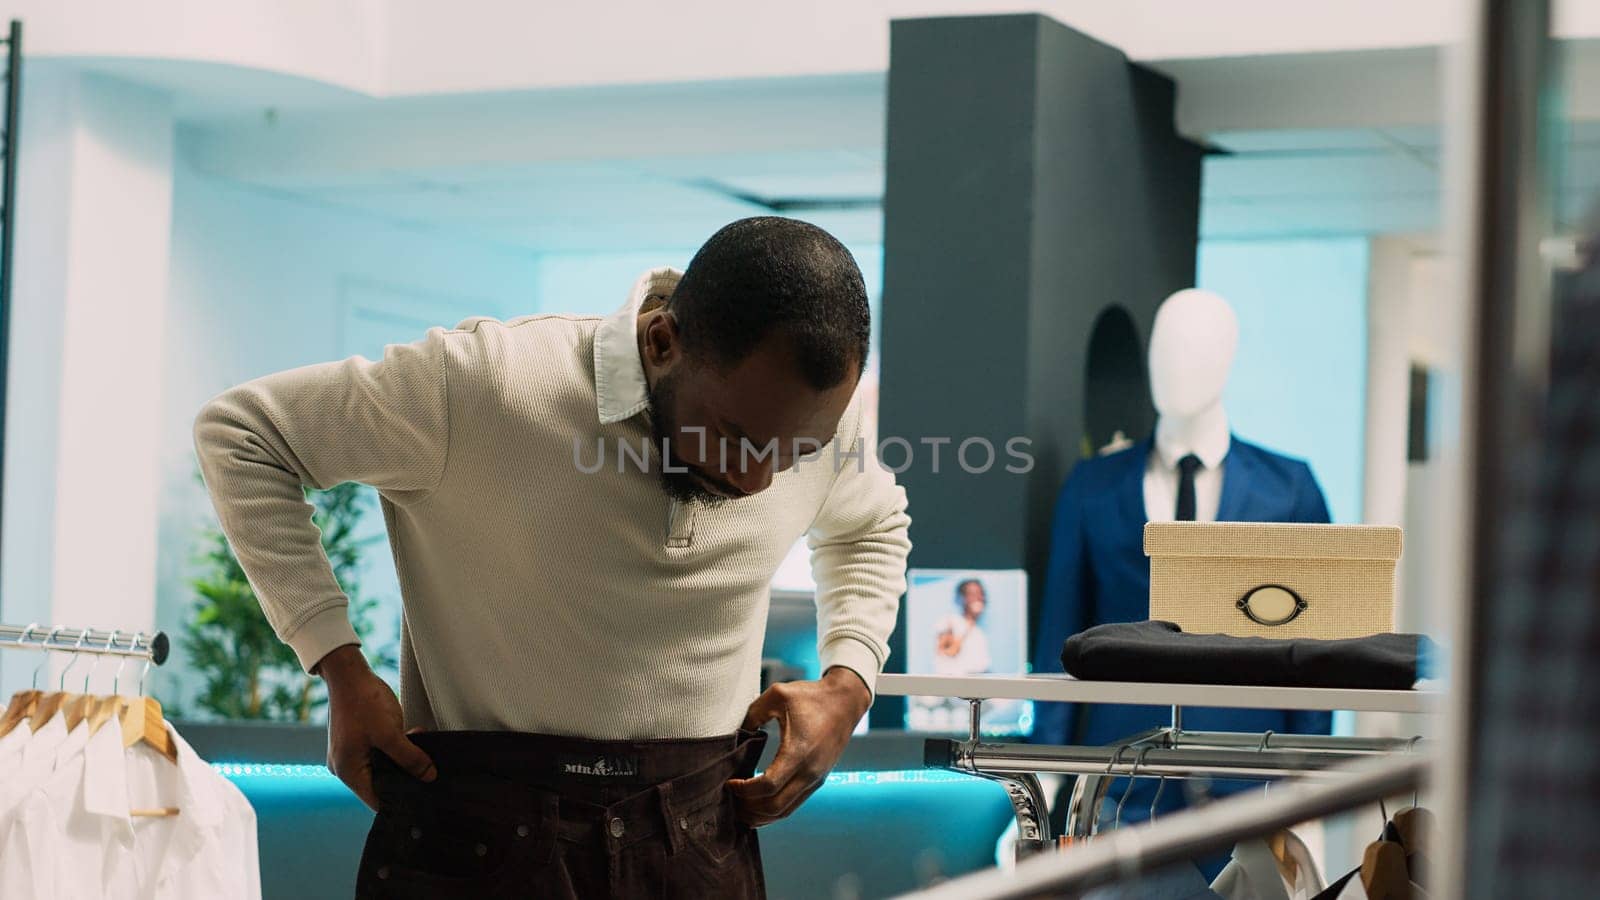 Young client checking pair of pants in clothing store, looking to buy fashionable brands on sale. Casual man examining formal wear clothes in retail shop at mall, small business. Handheld shot.